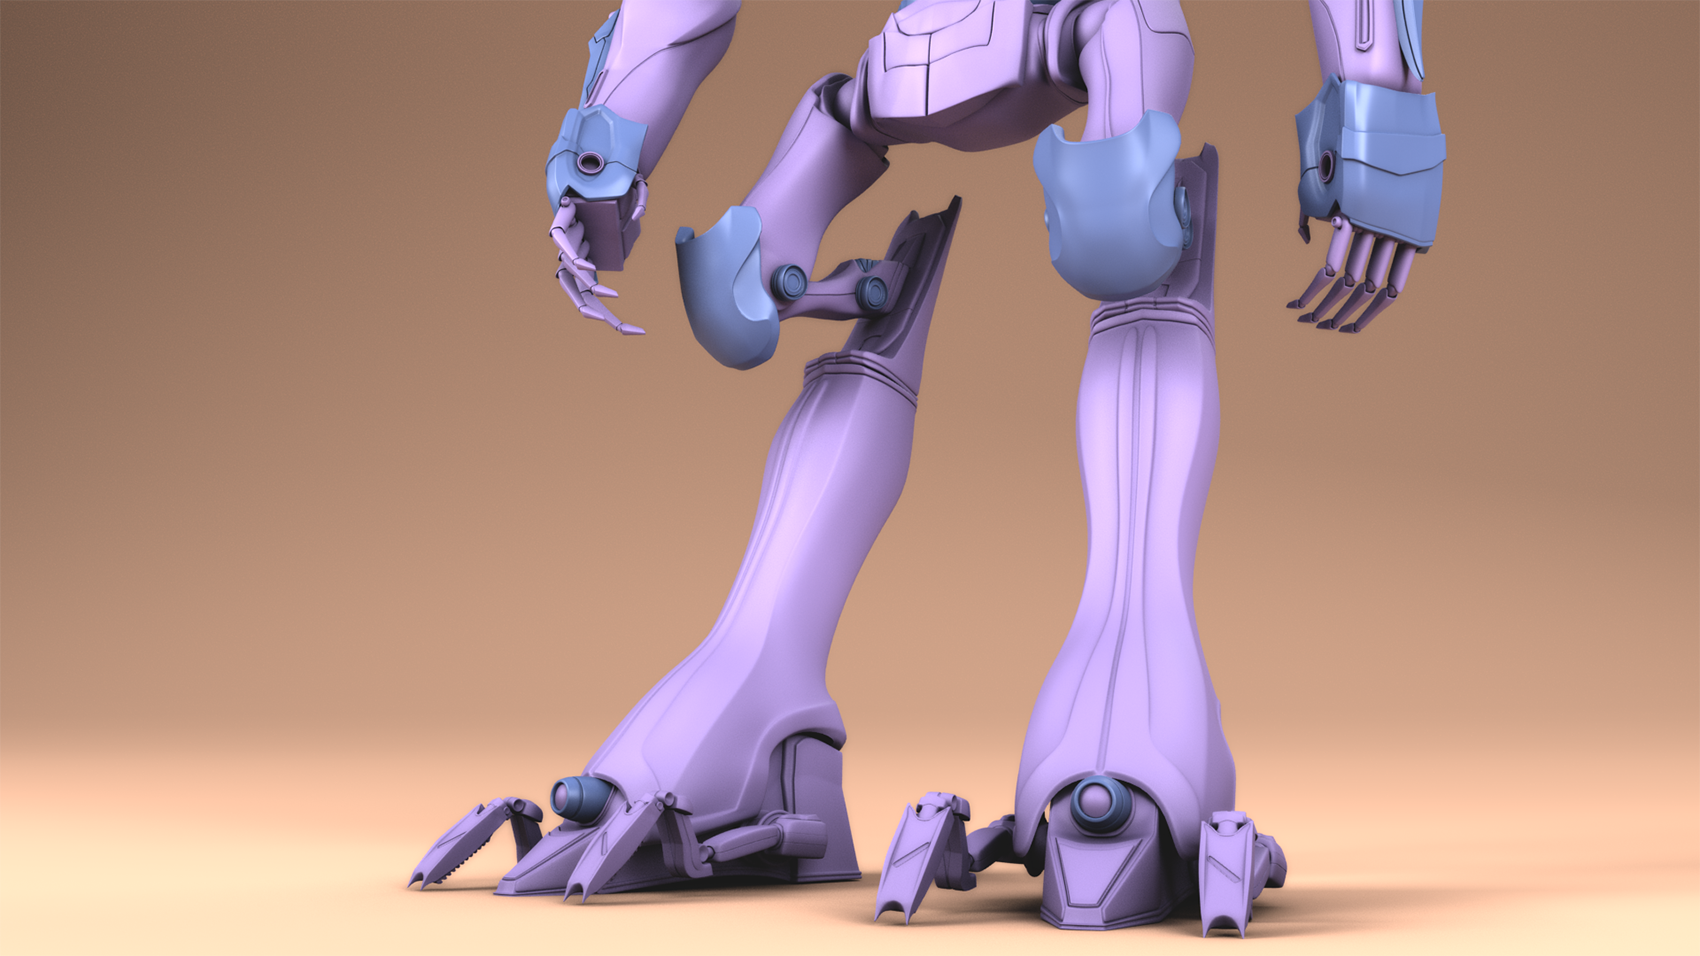 A close-up view of the lower half of a purple robot 3D design.